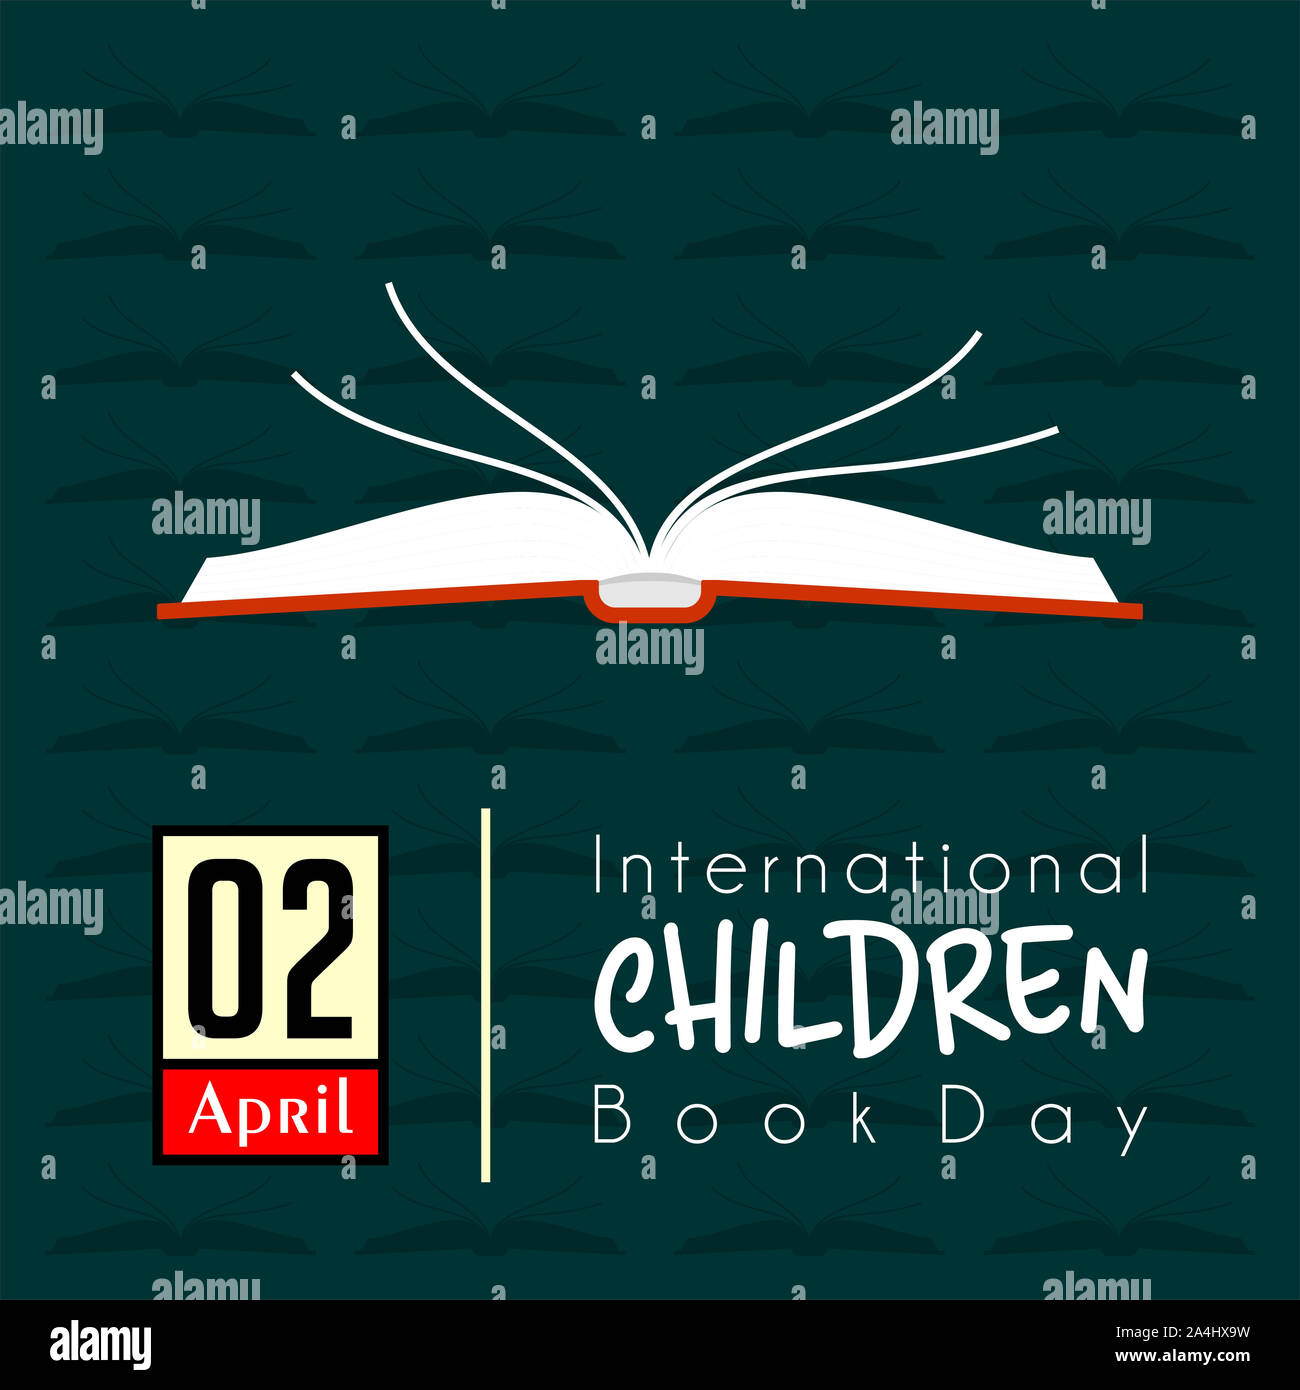 International Children's Book Day on 2 April with open book cartoon vector design Stock Photo